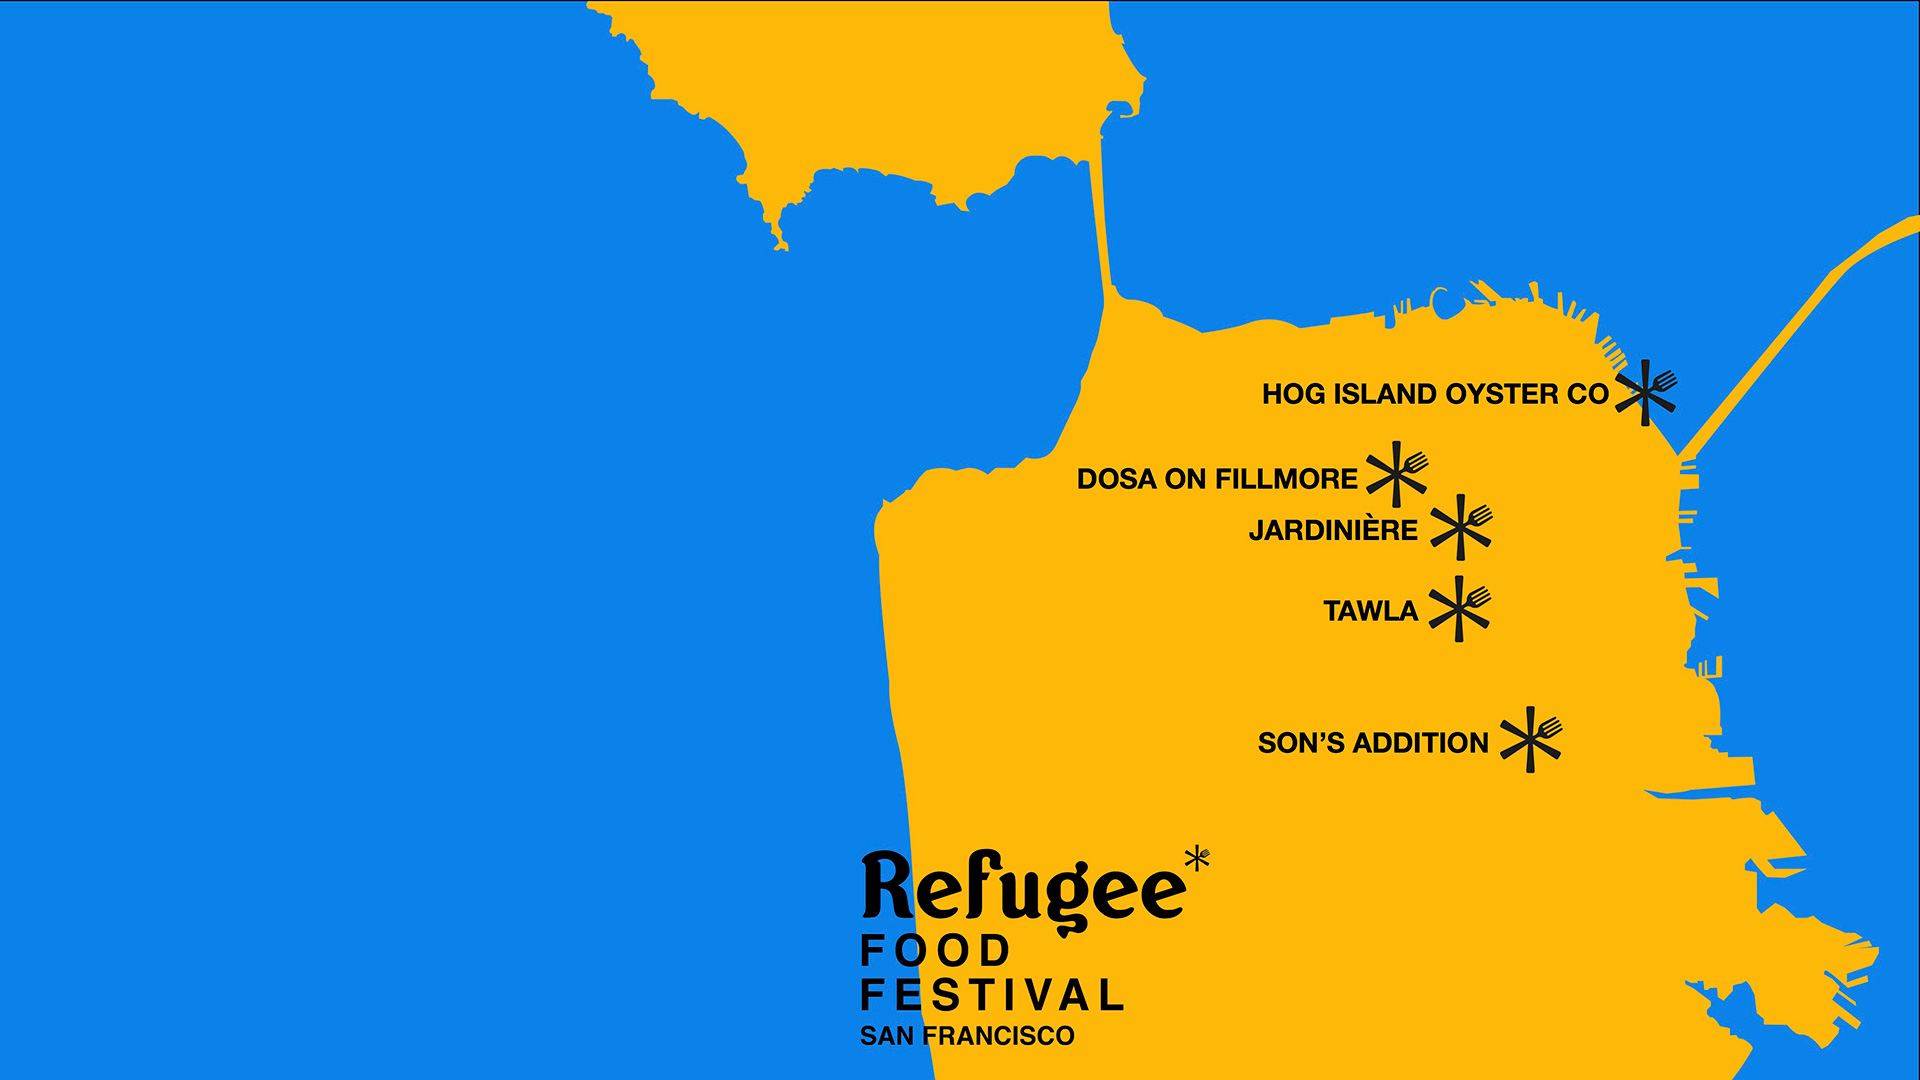 Don’t miss the Refugee Food Festival in San Francisco.